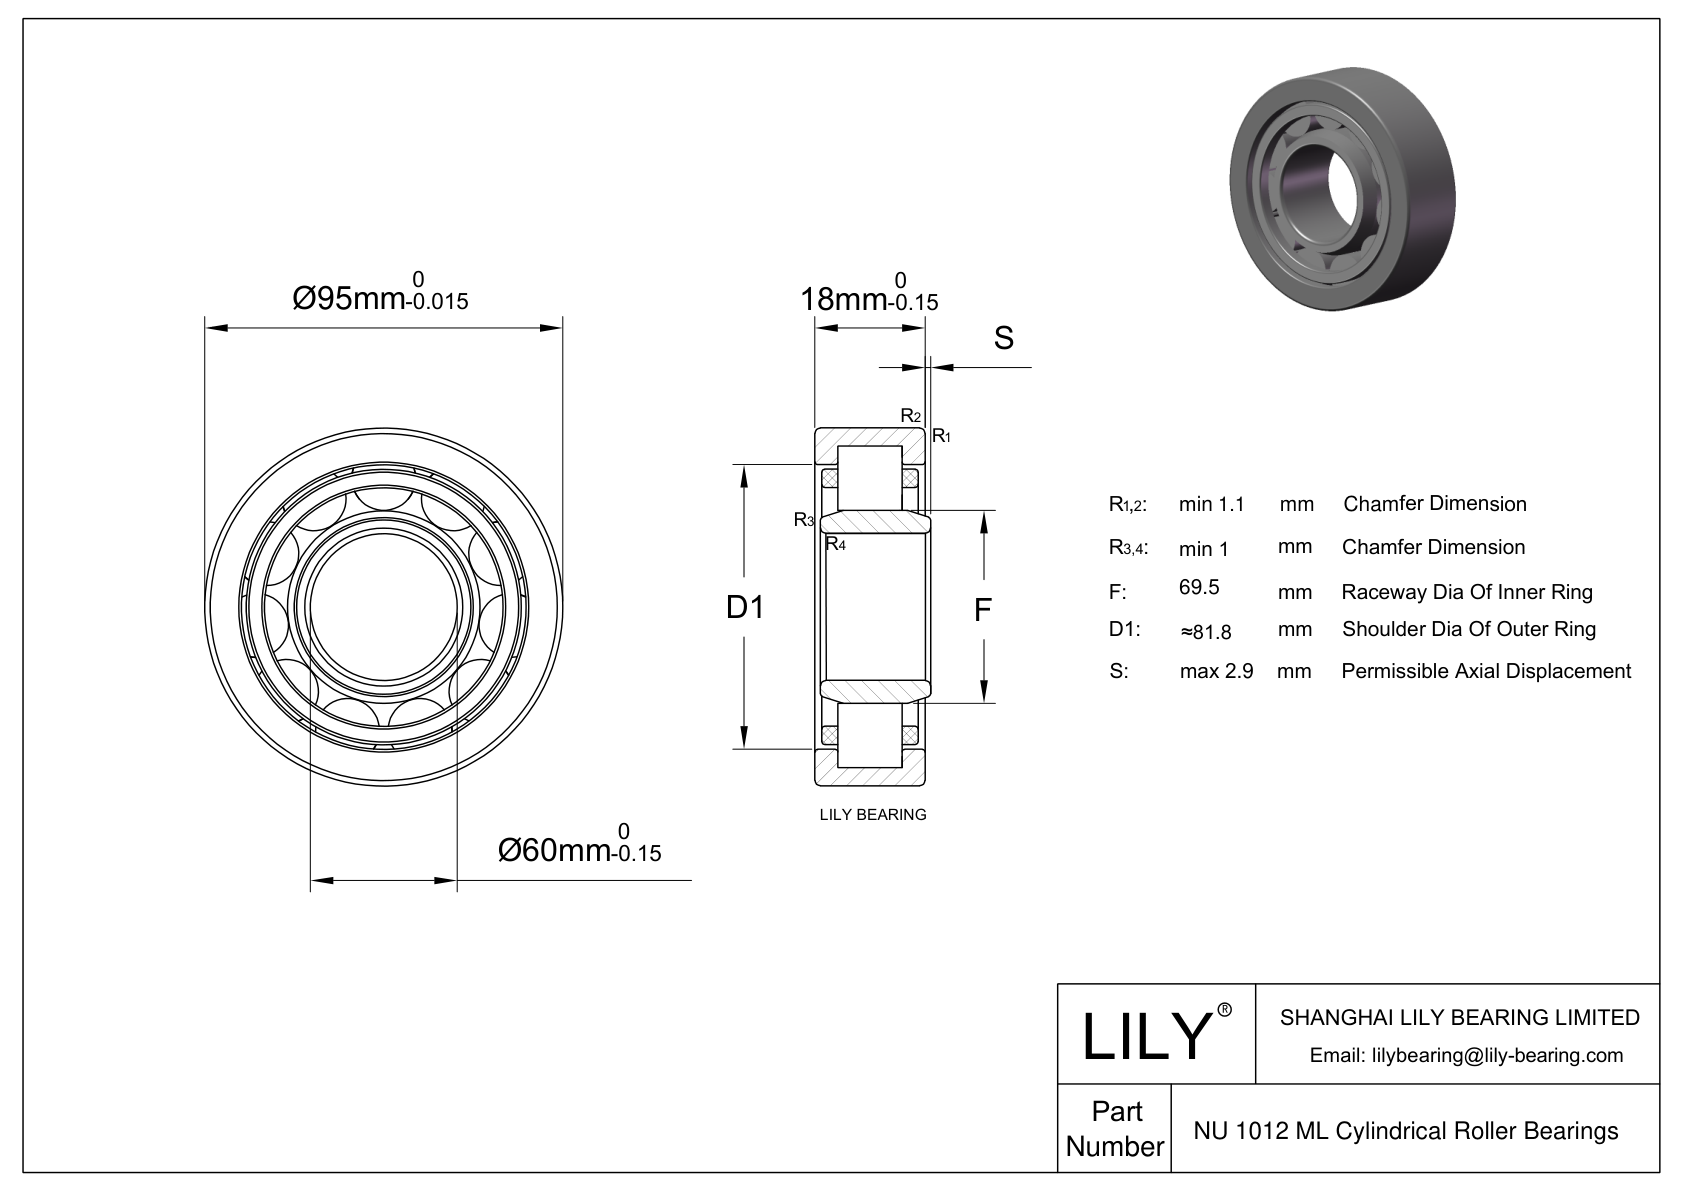 NU 1012 ML/C3VL0241 Ceramic Coated Cylindrical Roller Bearings cad drawing